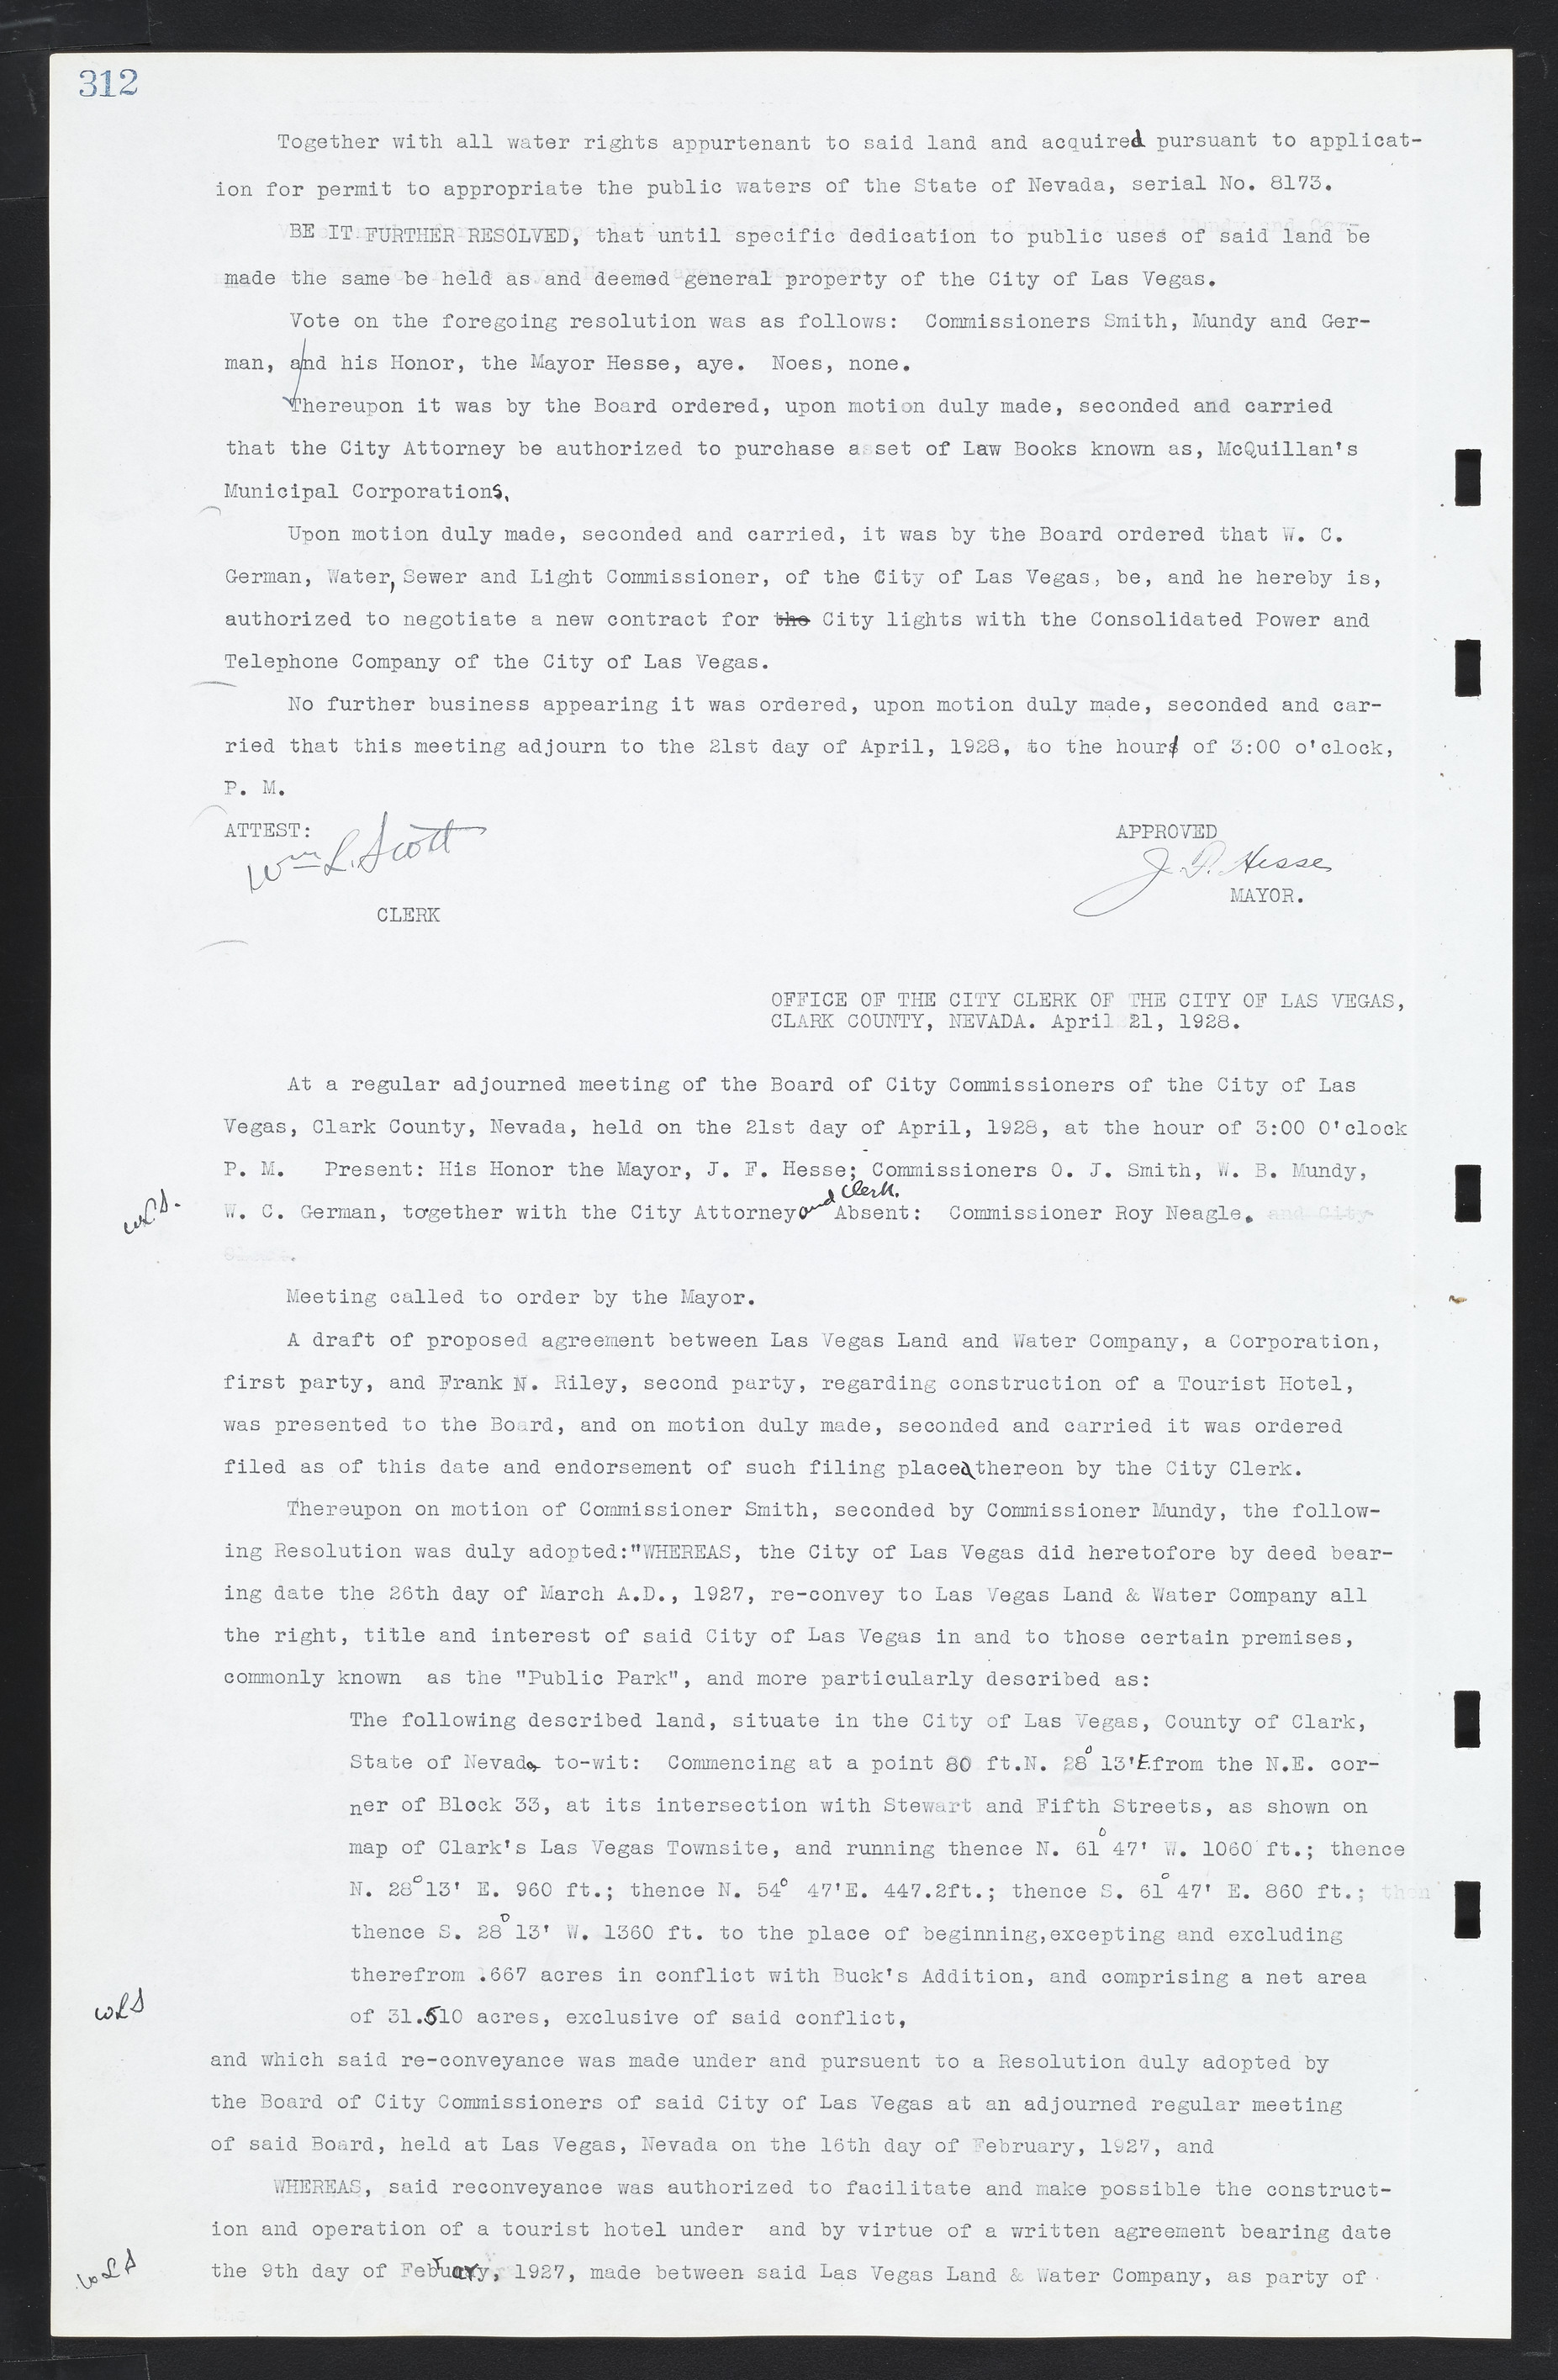 Las Vegas City Commission Minutes, March 1, 1922 to May 10, 1929, lvc000002-321